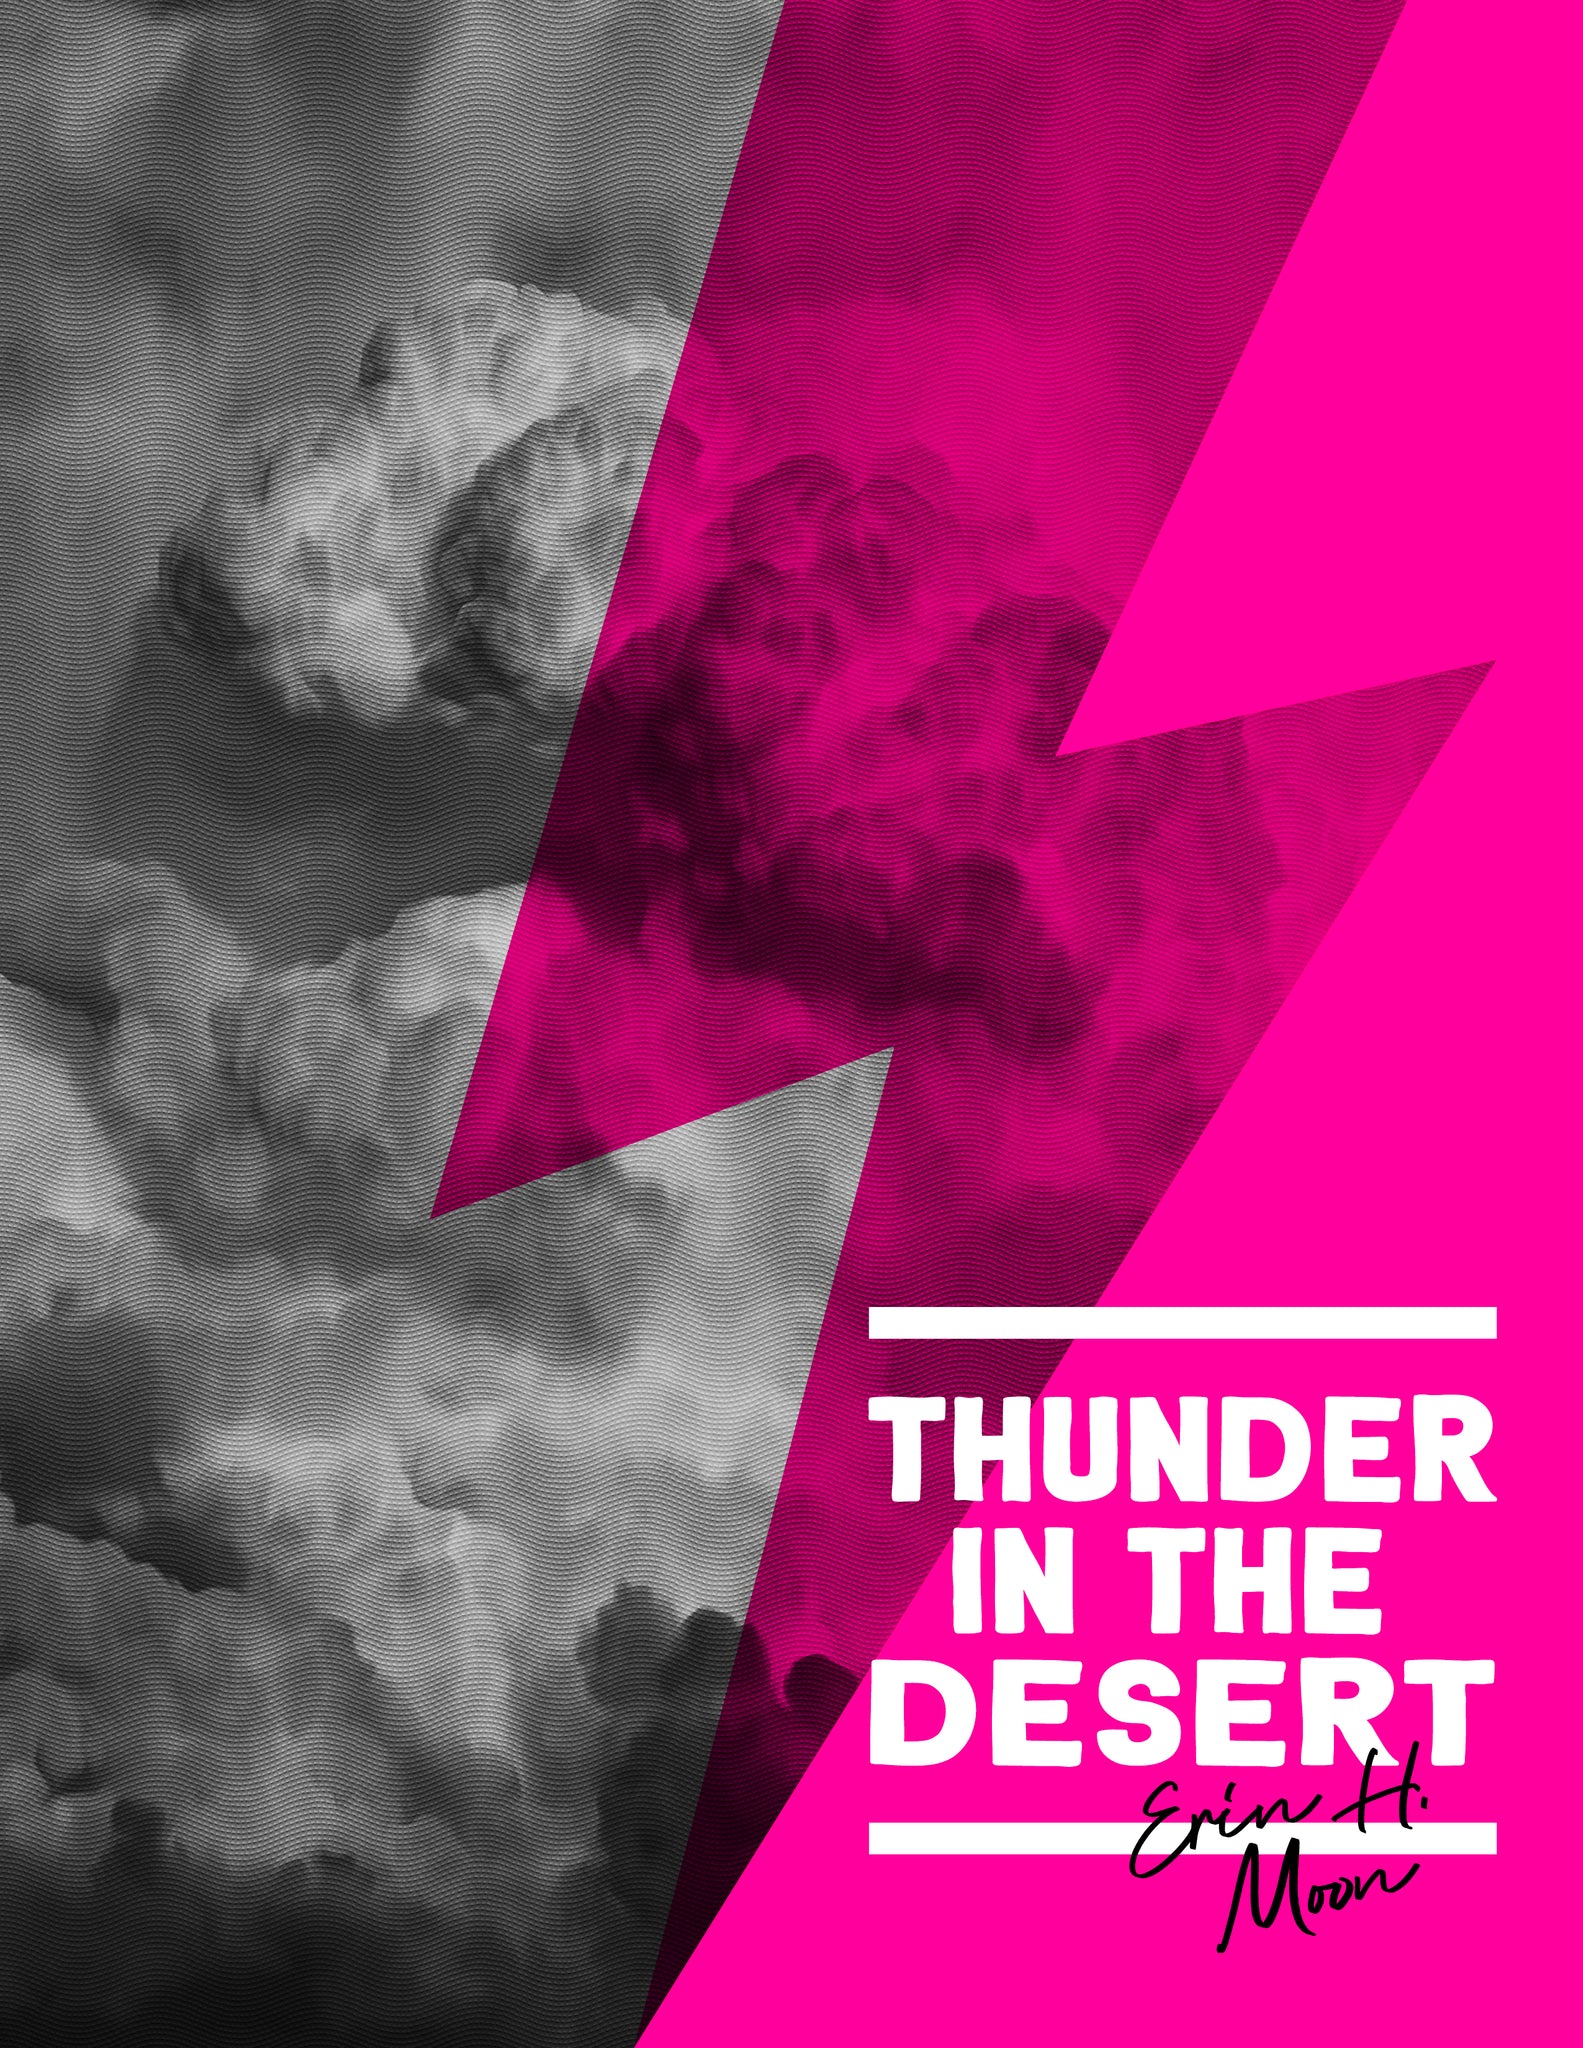 Thunder in the Desert: A Study of Isaiah 40